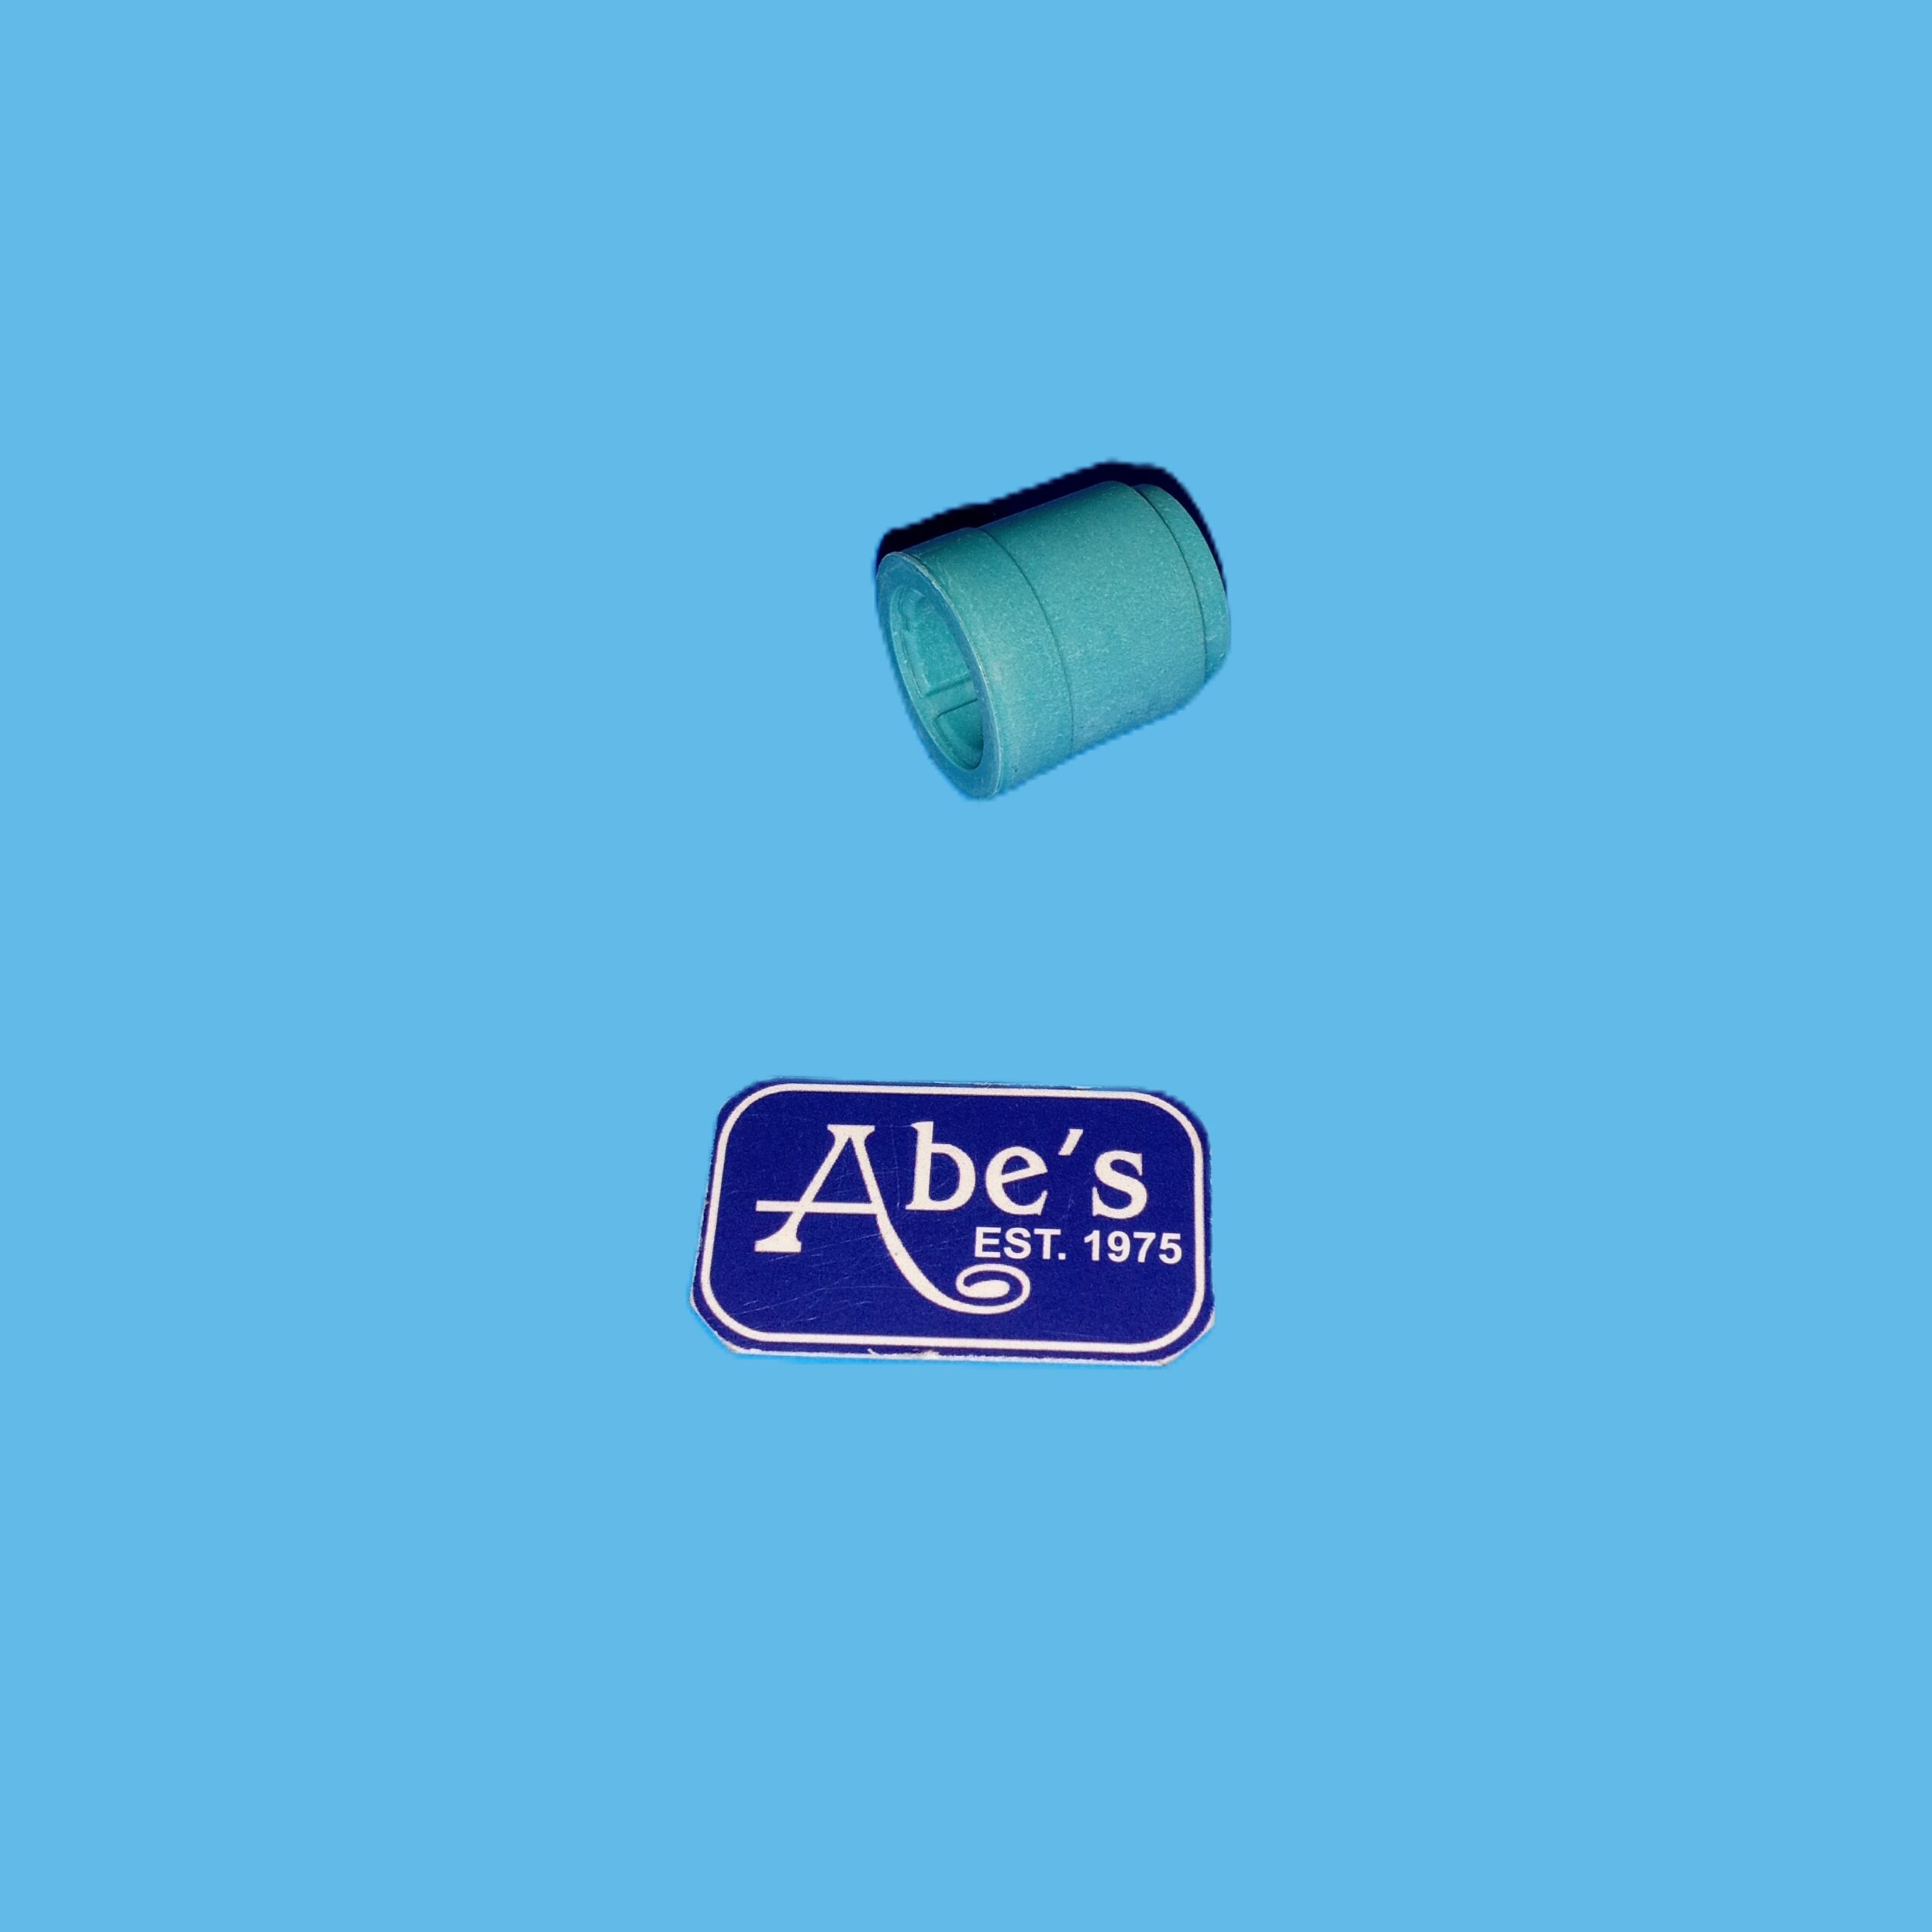 Hayward Spindle Gear  Bushing for Hayward Cleaners / AXV066A / Affordable $ 13.75 / Hard to Find Pool cleaner parts? Find Hard to Find Parts at Abe's Pools & Spas